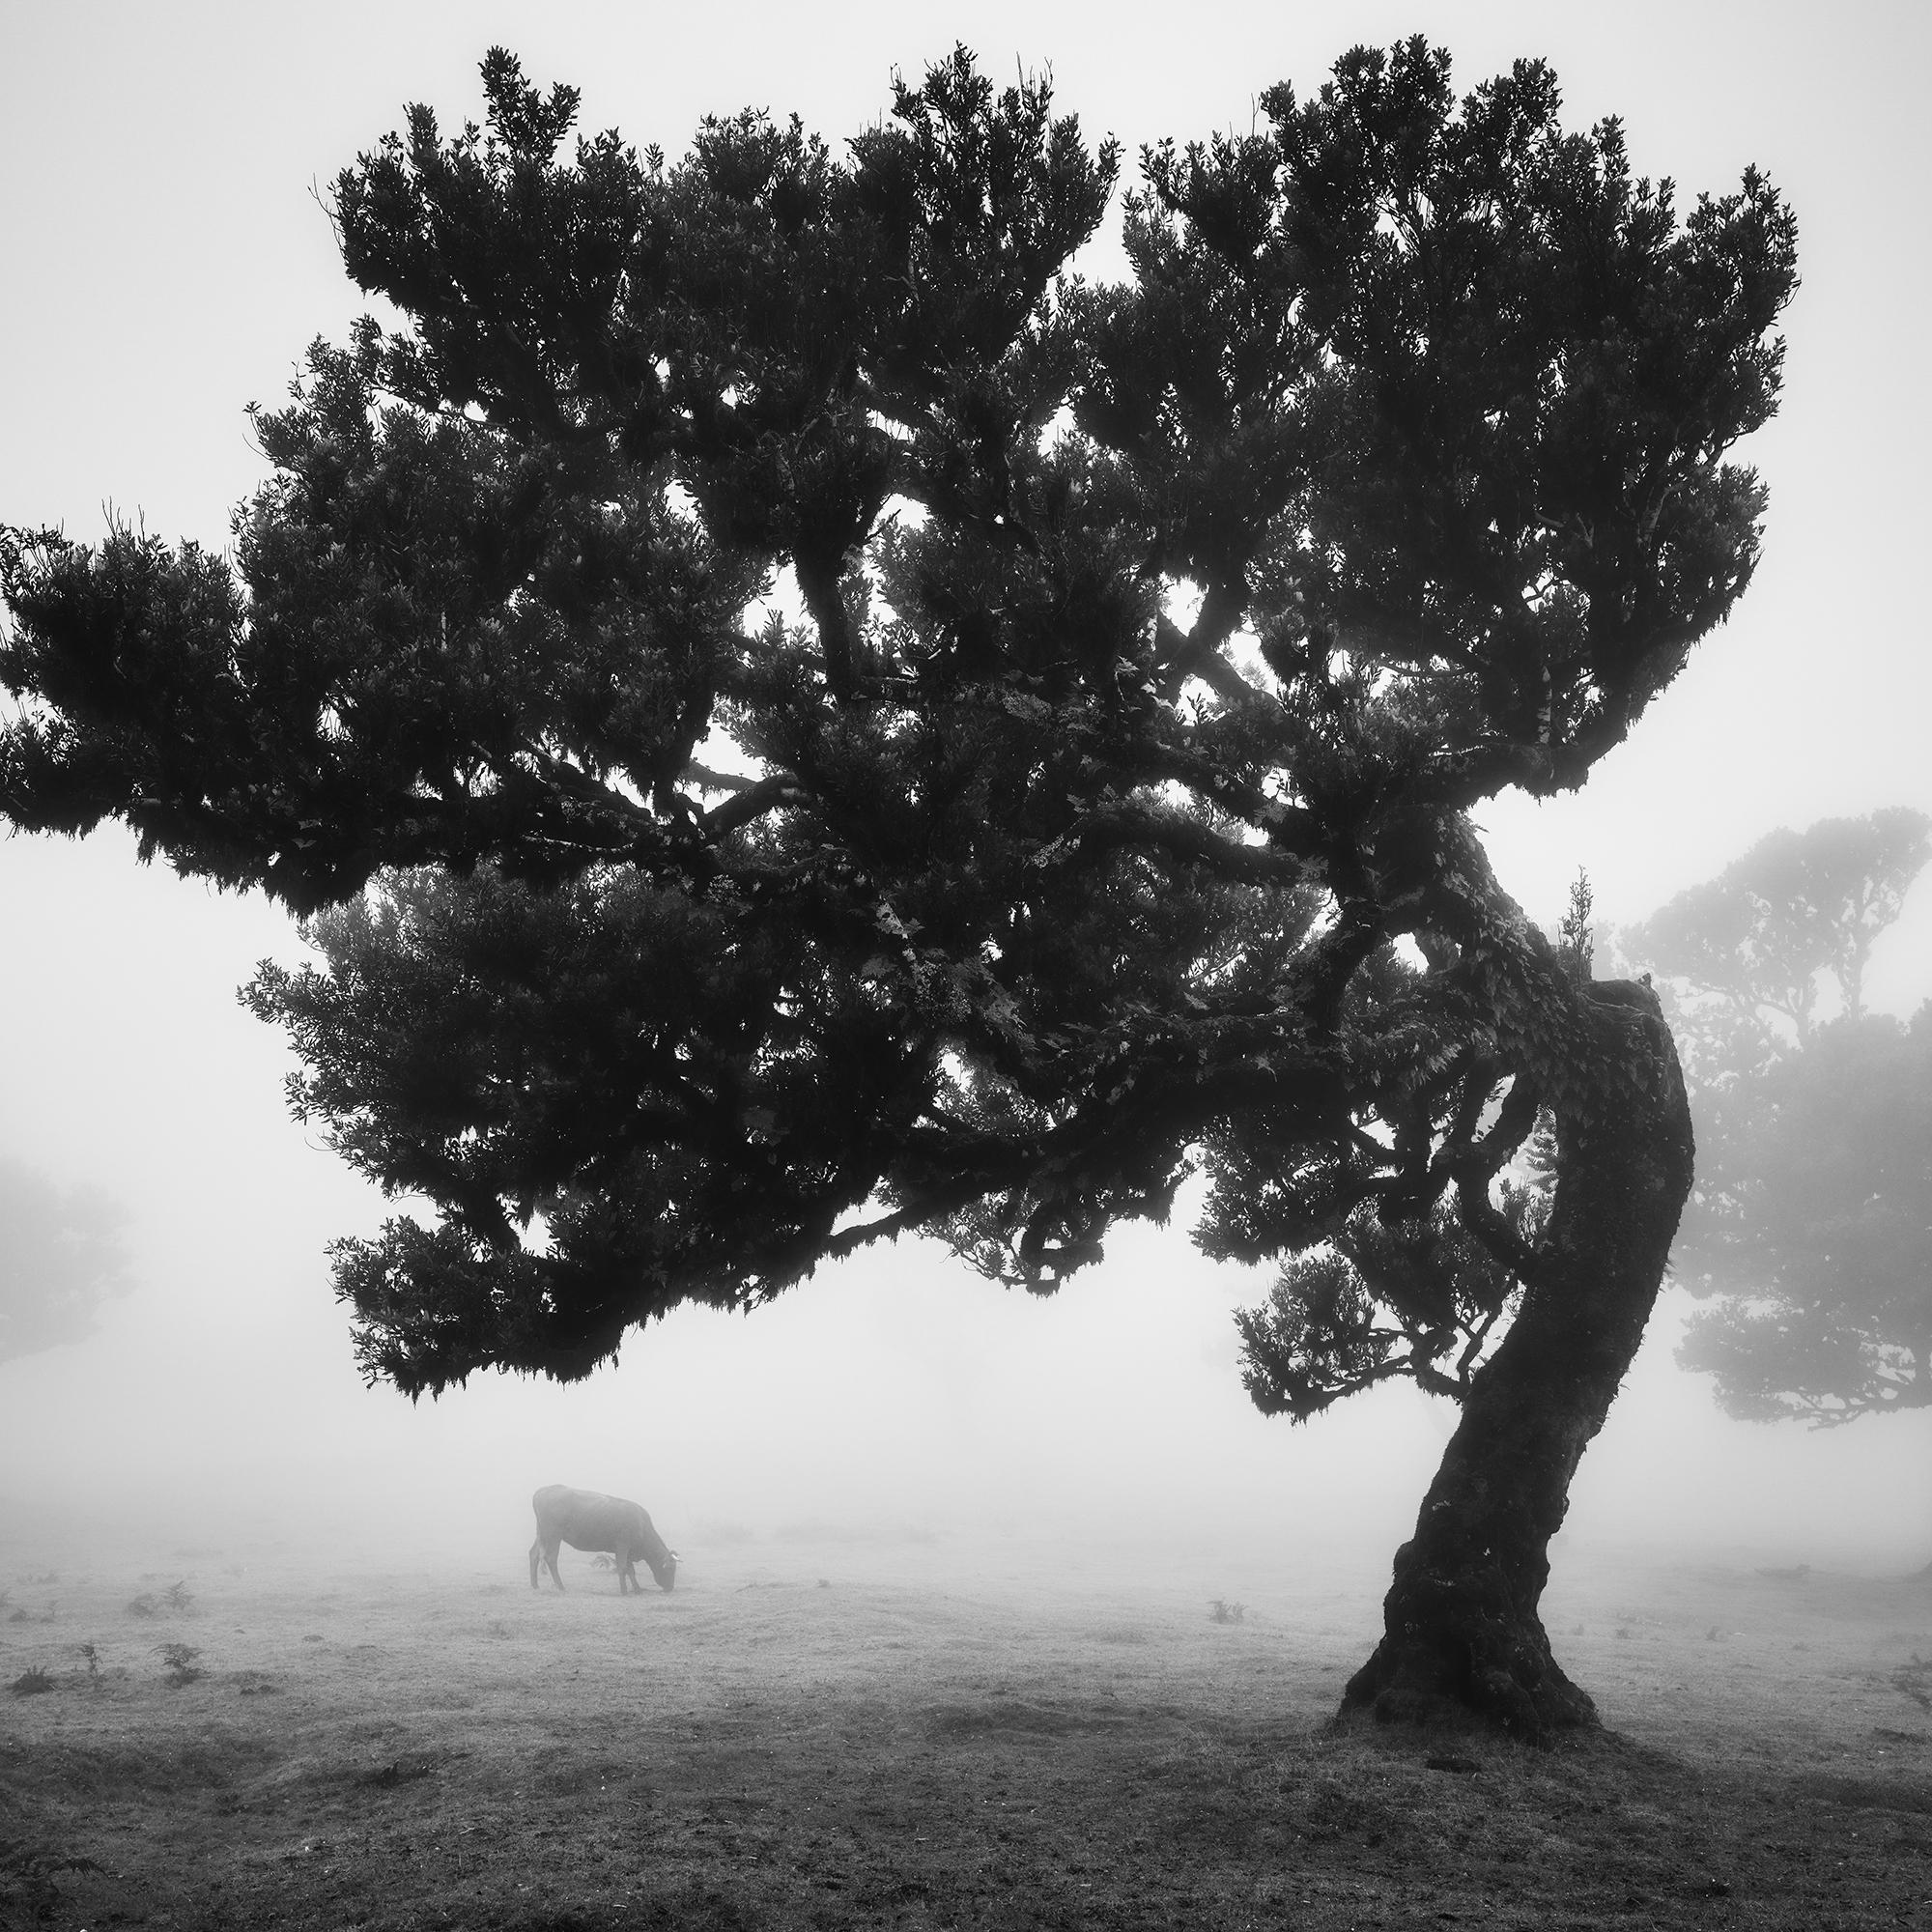 Cows on the foggy pasture, misty Morning, black and white photography, landscape For Sale 3